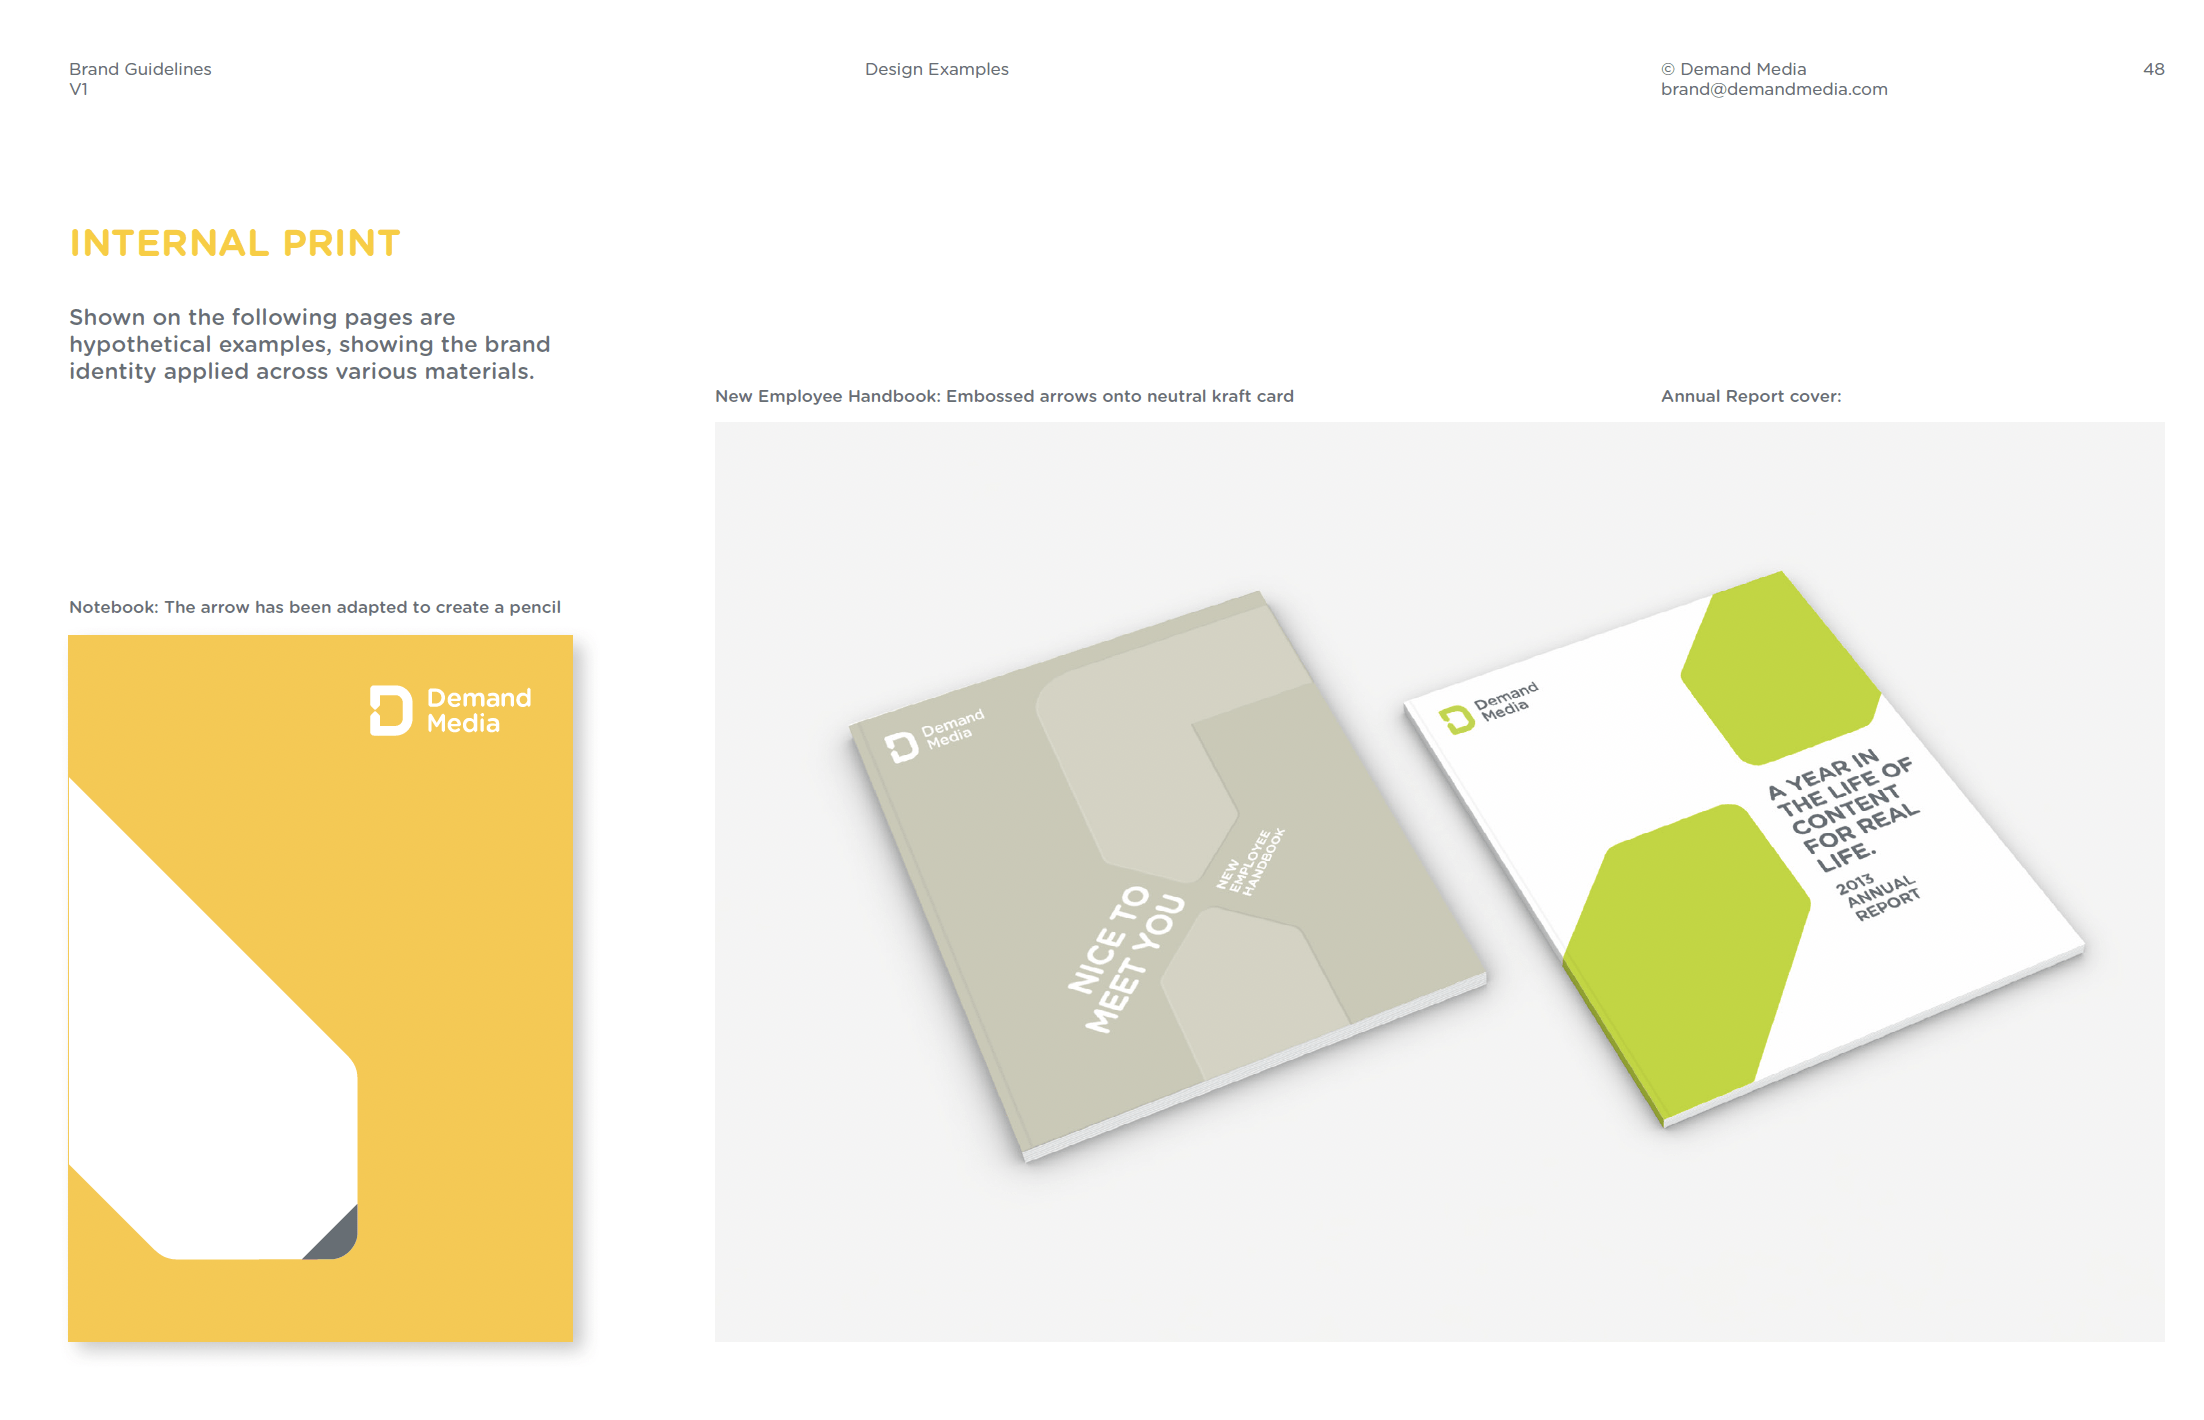 Demand Media design system. Example of a corporate identity trade dress